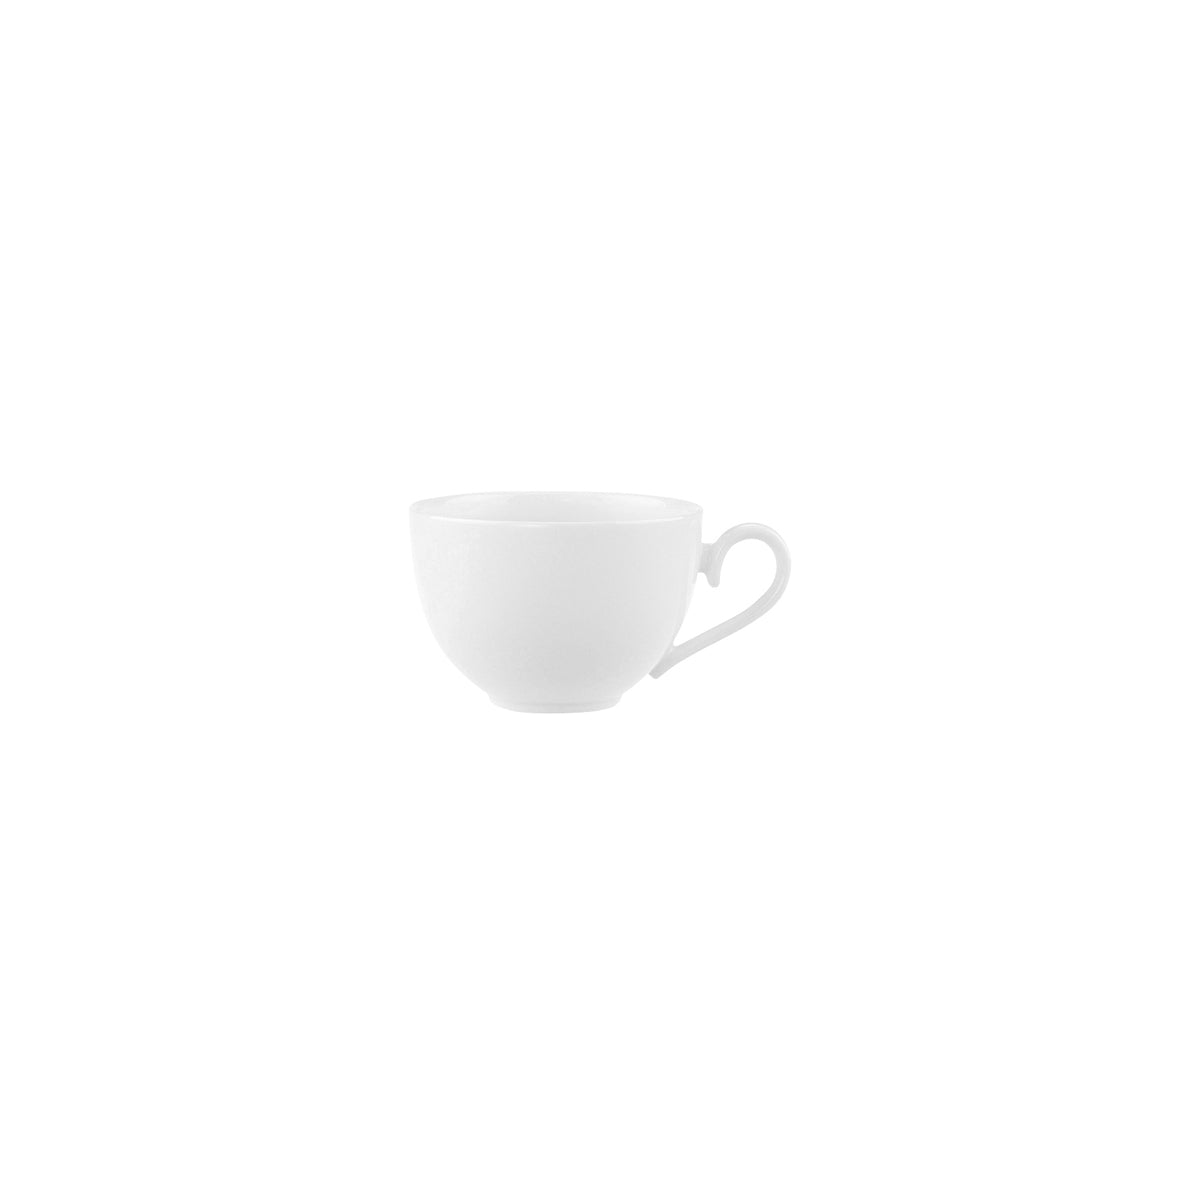 VB16-3272-1300 Villeroy And Boch Villeroy And Boch Stella Hotel White Cup No. 3 200ml Tomkin Australia Hospitality Supplies